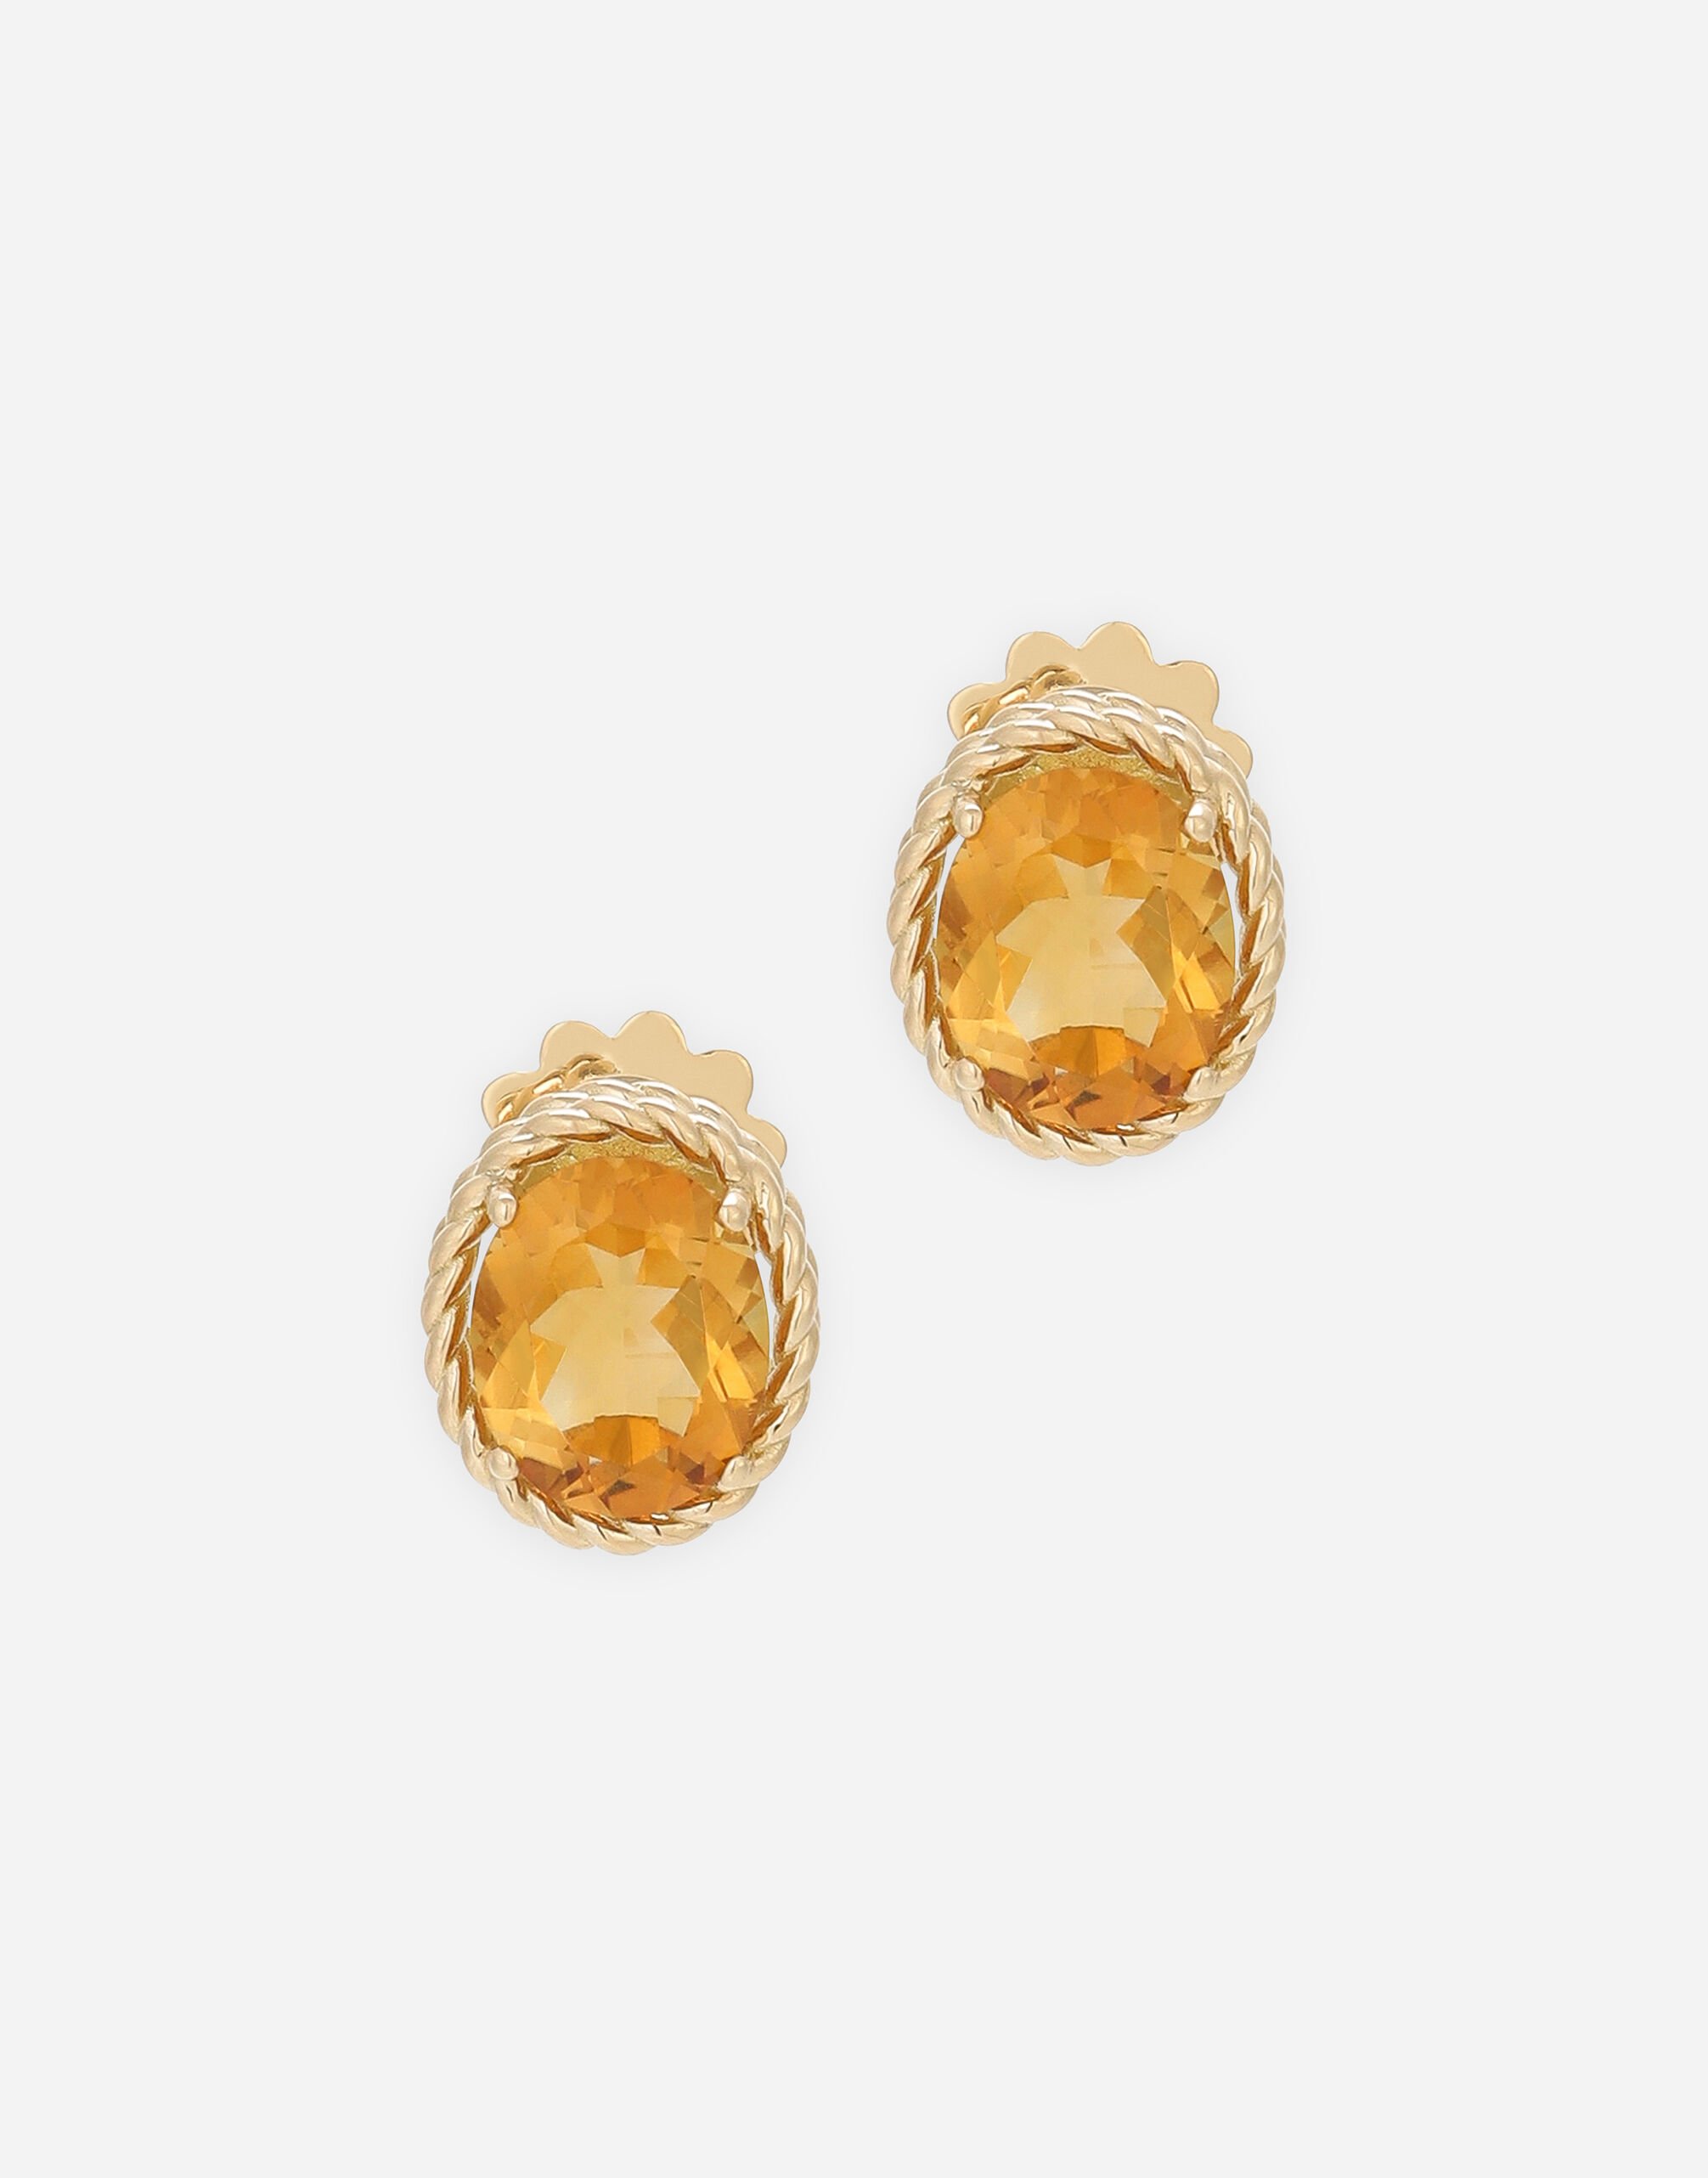 Dolce & Gabbana Anna earrings in yellow gold 18kt with citrines Gold WEQA2GWPE01